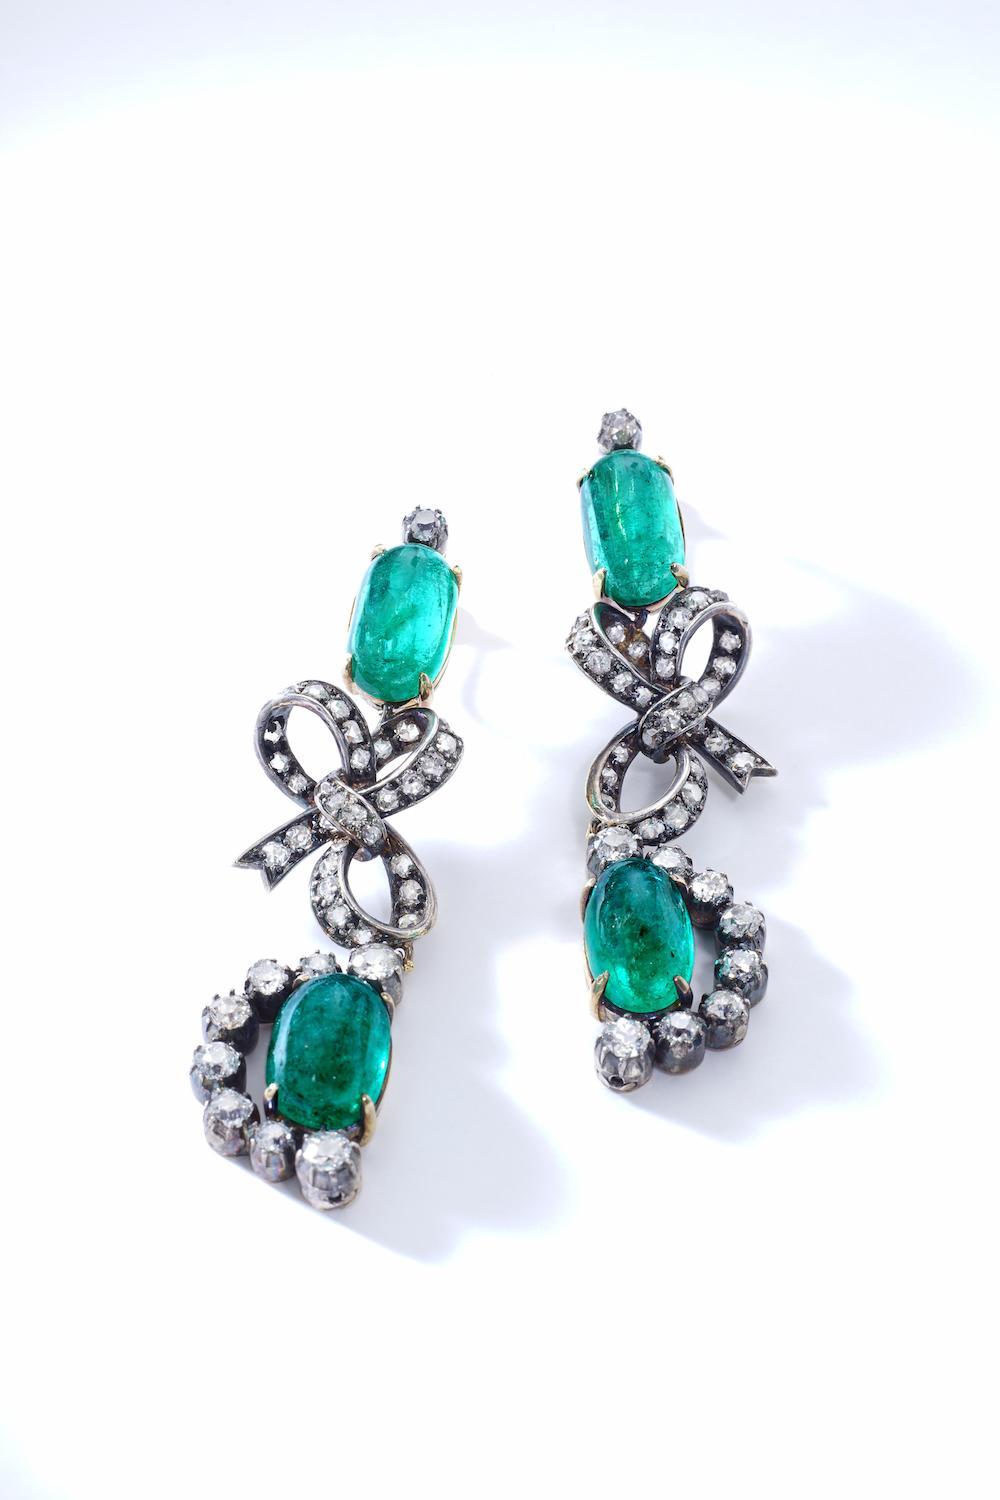 So Lovely! Those Ear Pendants looks like a gift, like candies!
Each Earrings is highlighted by delicate a bow.
Cabochon Emerald surrounded by Old-mine cut diamond on silver and gold. 
Late XIXth Century.
Total Length: 2.56 inches (6.60